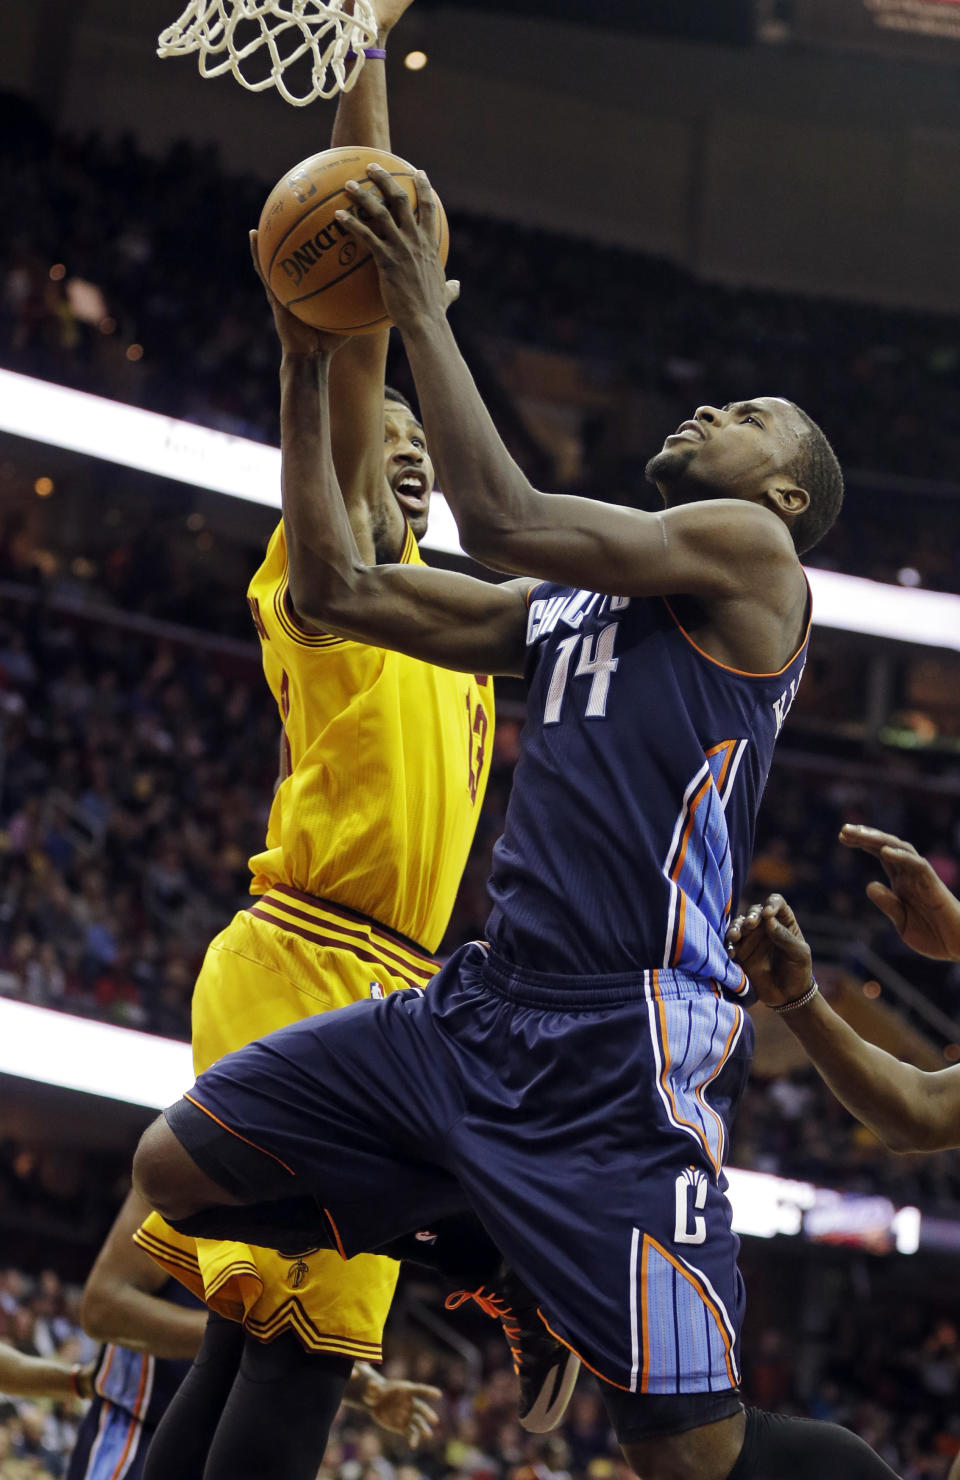 Charlotte Bobcats' Michael Kidd-Gilchrist (14) goes up to shoot against Cleveland Cavaliers' Tristan Thompson in the first quarter of an NBA basketball game on Saturday, April 5, 2014, in Cleveland. (AP Photo/Mark Duncan)